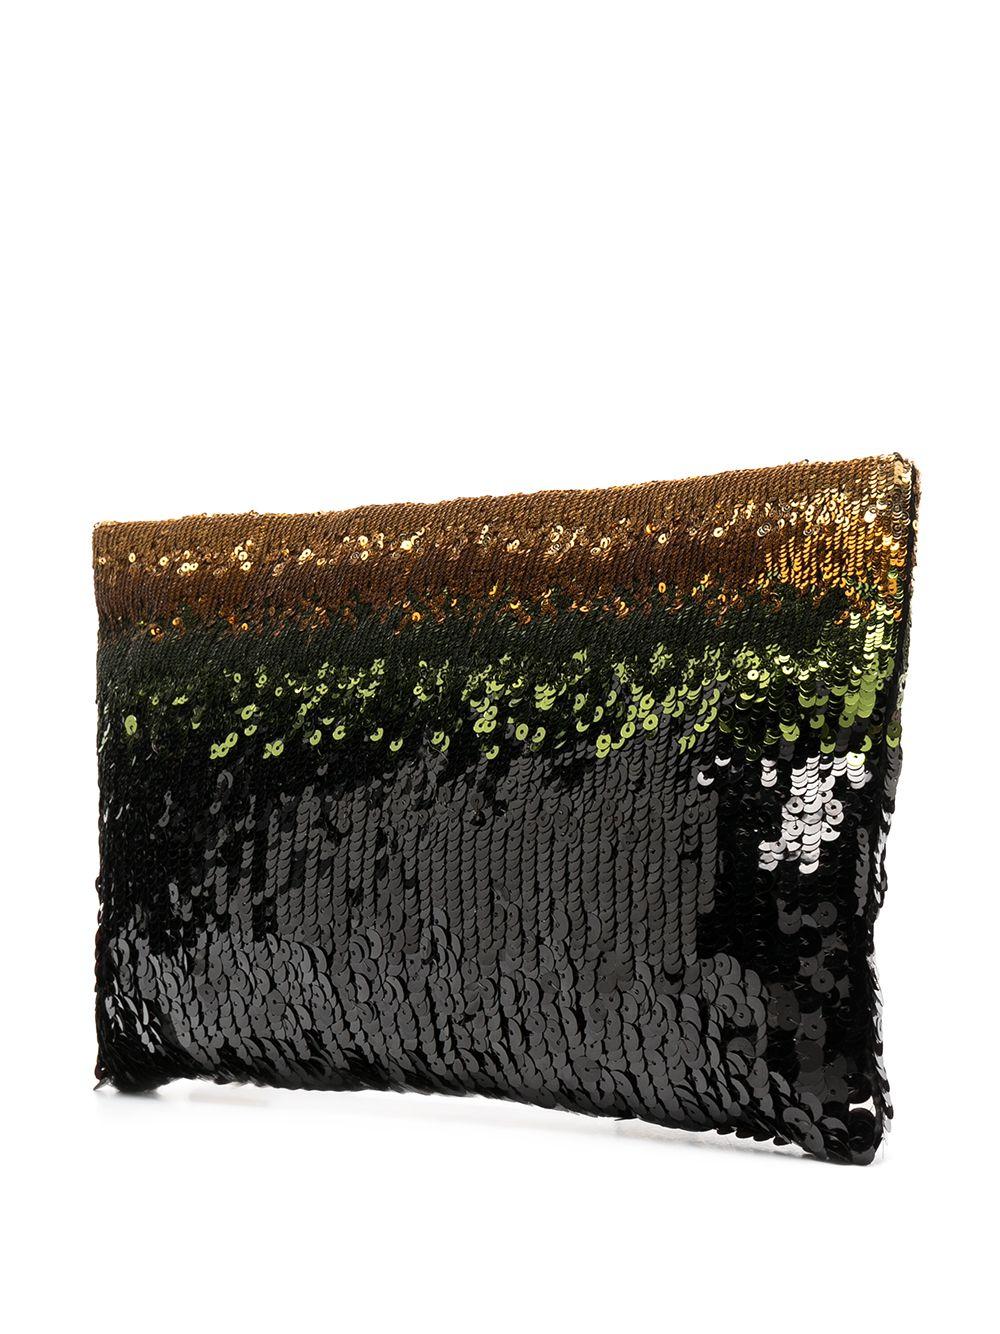 For some added sparkle look no further than this PRADA Sequin bag. Adorned with all-over sequin embellishments in hues of black, gold and green and finished with the PRADA logo in gold-tone hardware. All you need for a dazzling look.

Colour: Green,